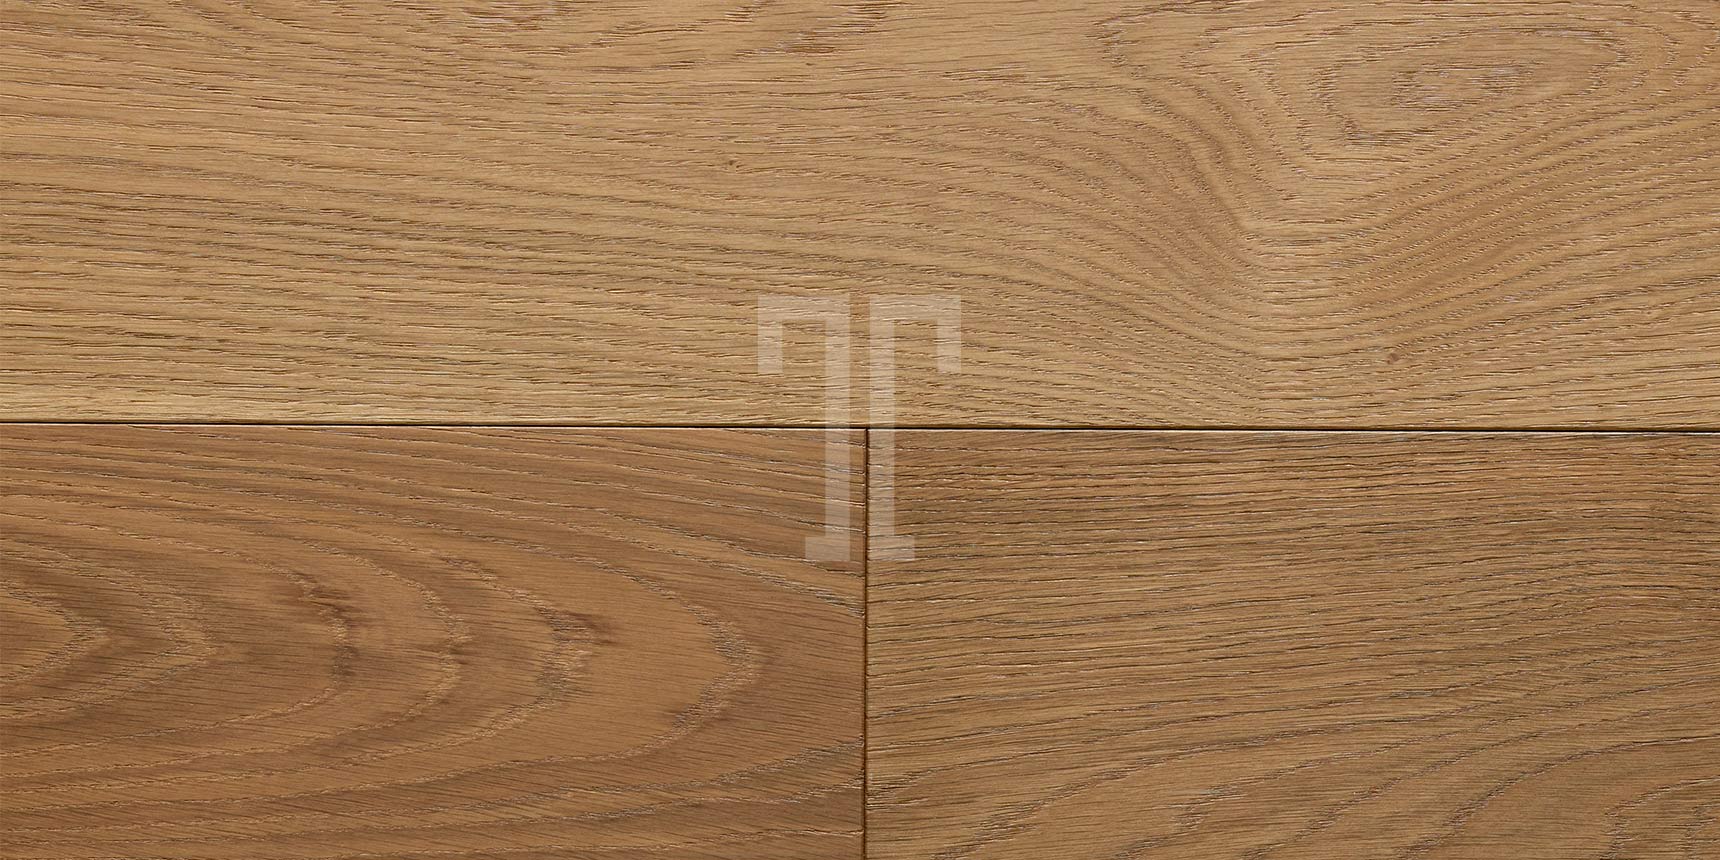 Ted Todd Project Extra Wide 14mm Plank Engineered Flooring £99.95m2